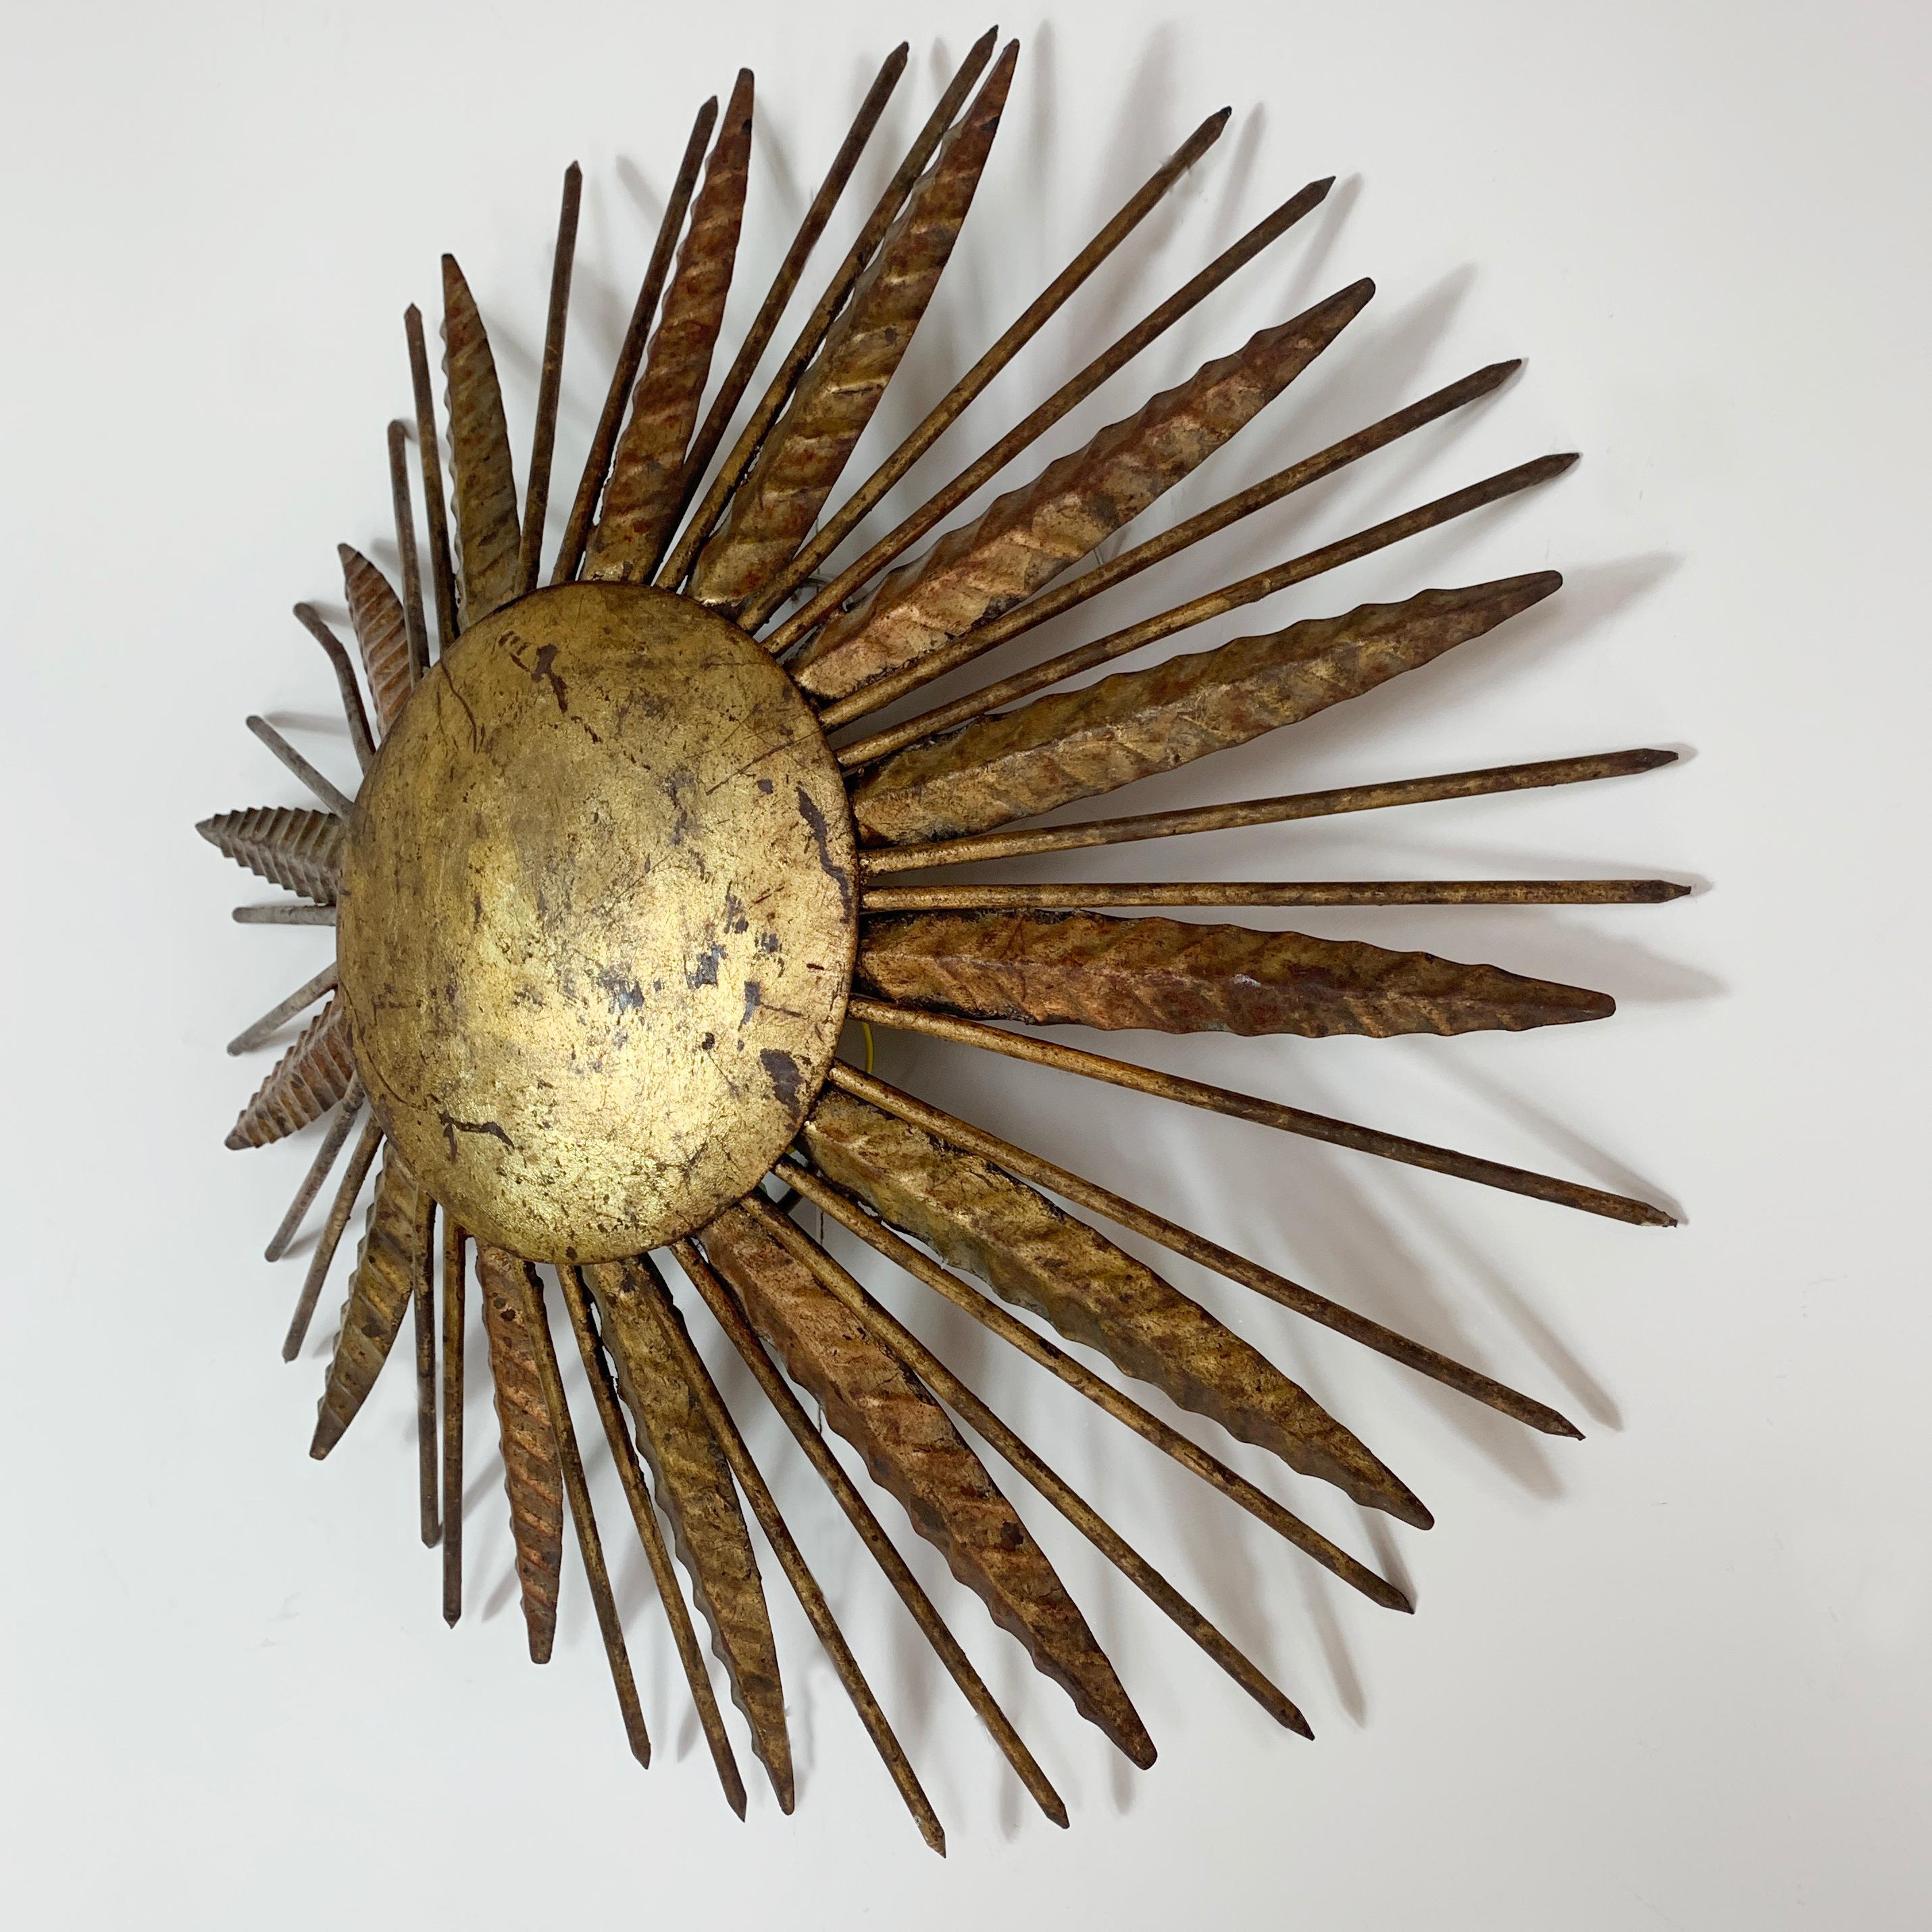 Spanish sunburst ceiling light
circa 1950s
Hand forged metal sunburst with gilt finish
Measures: 50cm width, 11cm depth
Spikey gilt nail rays emit from the central disk
The light takes 2 x E14 screw in bulbs
There is a hanging hook on the back